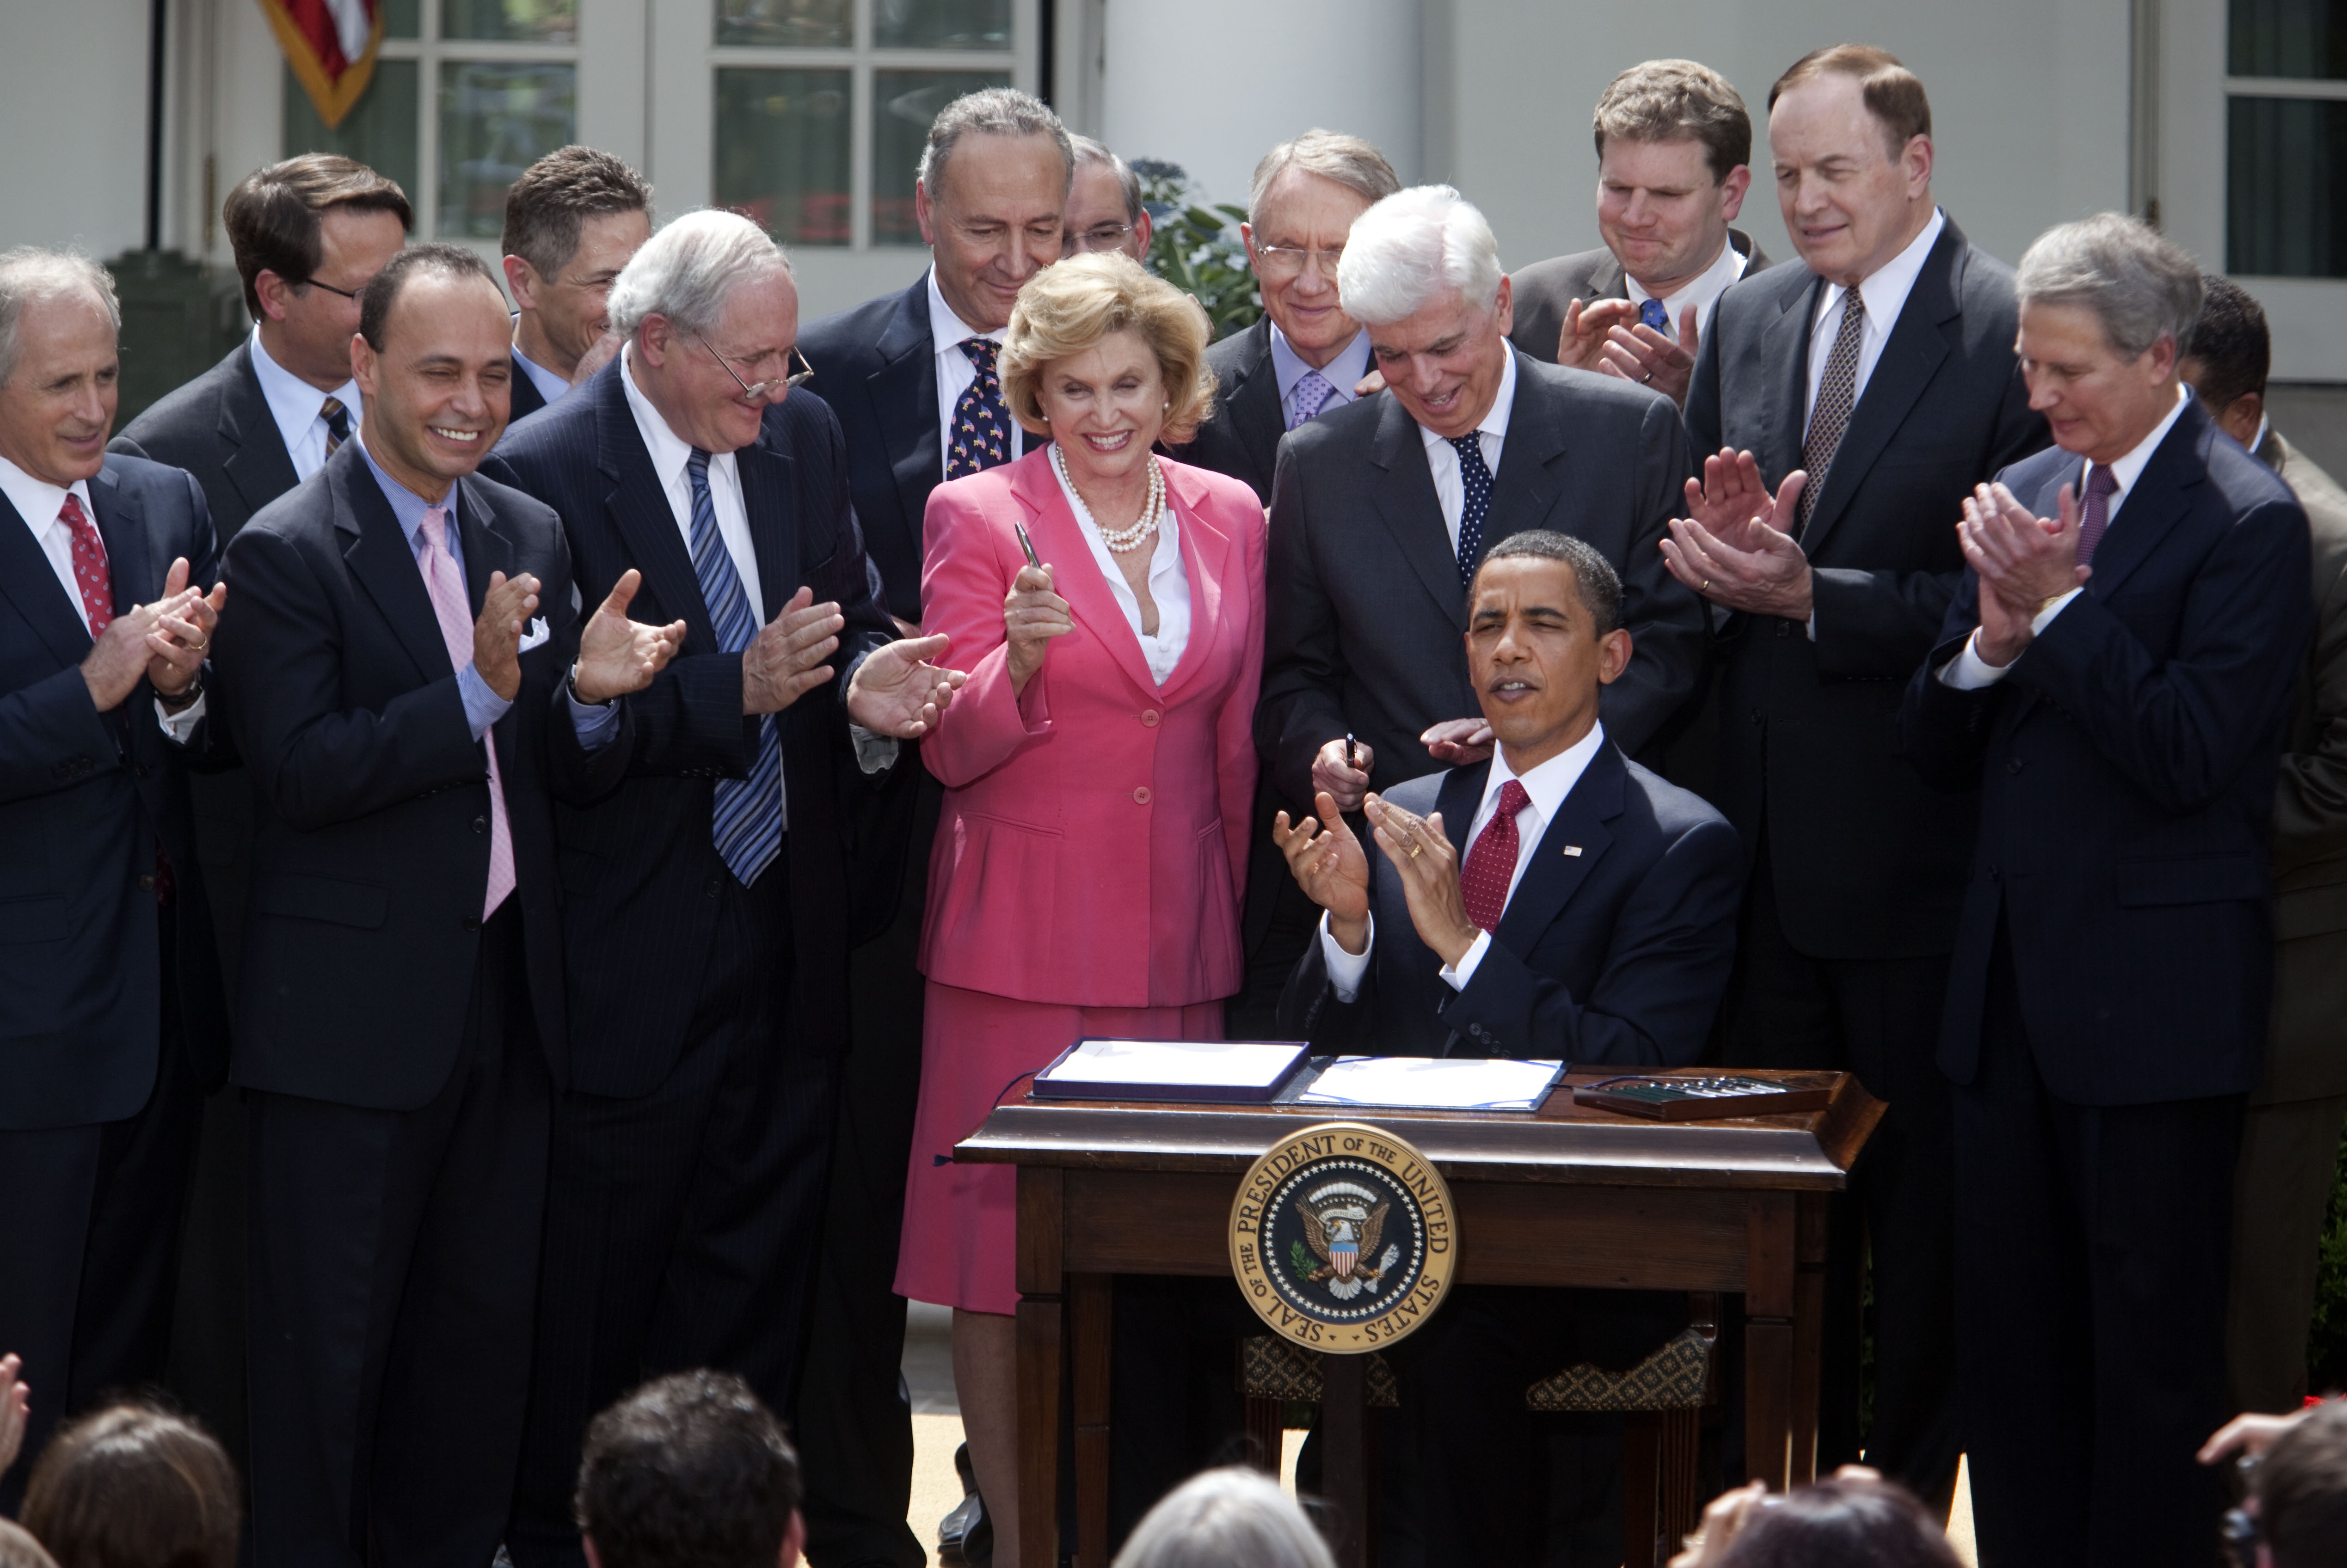 President Obama signs Rep. Maloney's Credit Cardholders' Bill of Rights in the White House Rose Garden